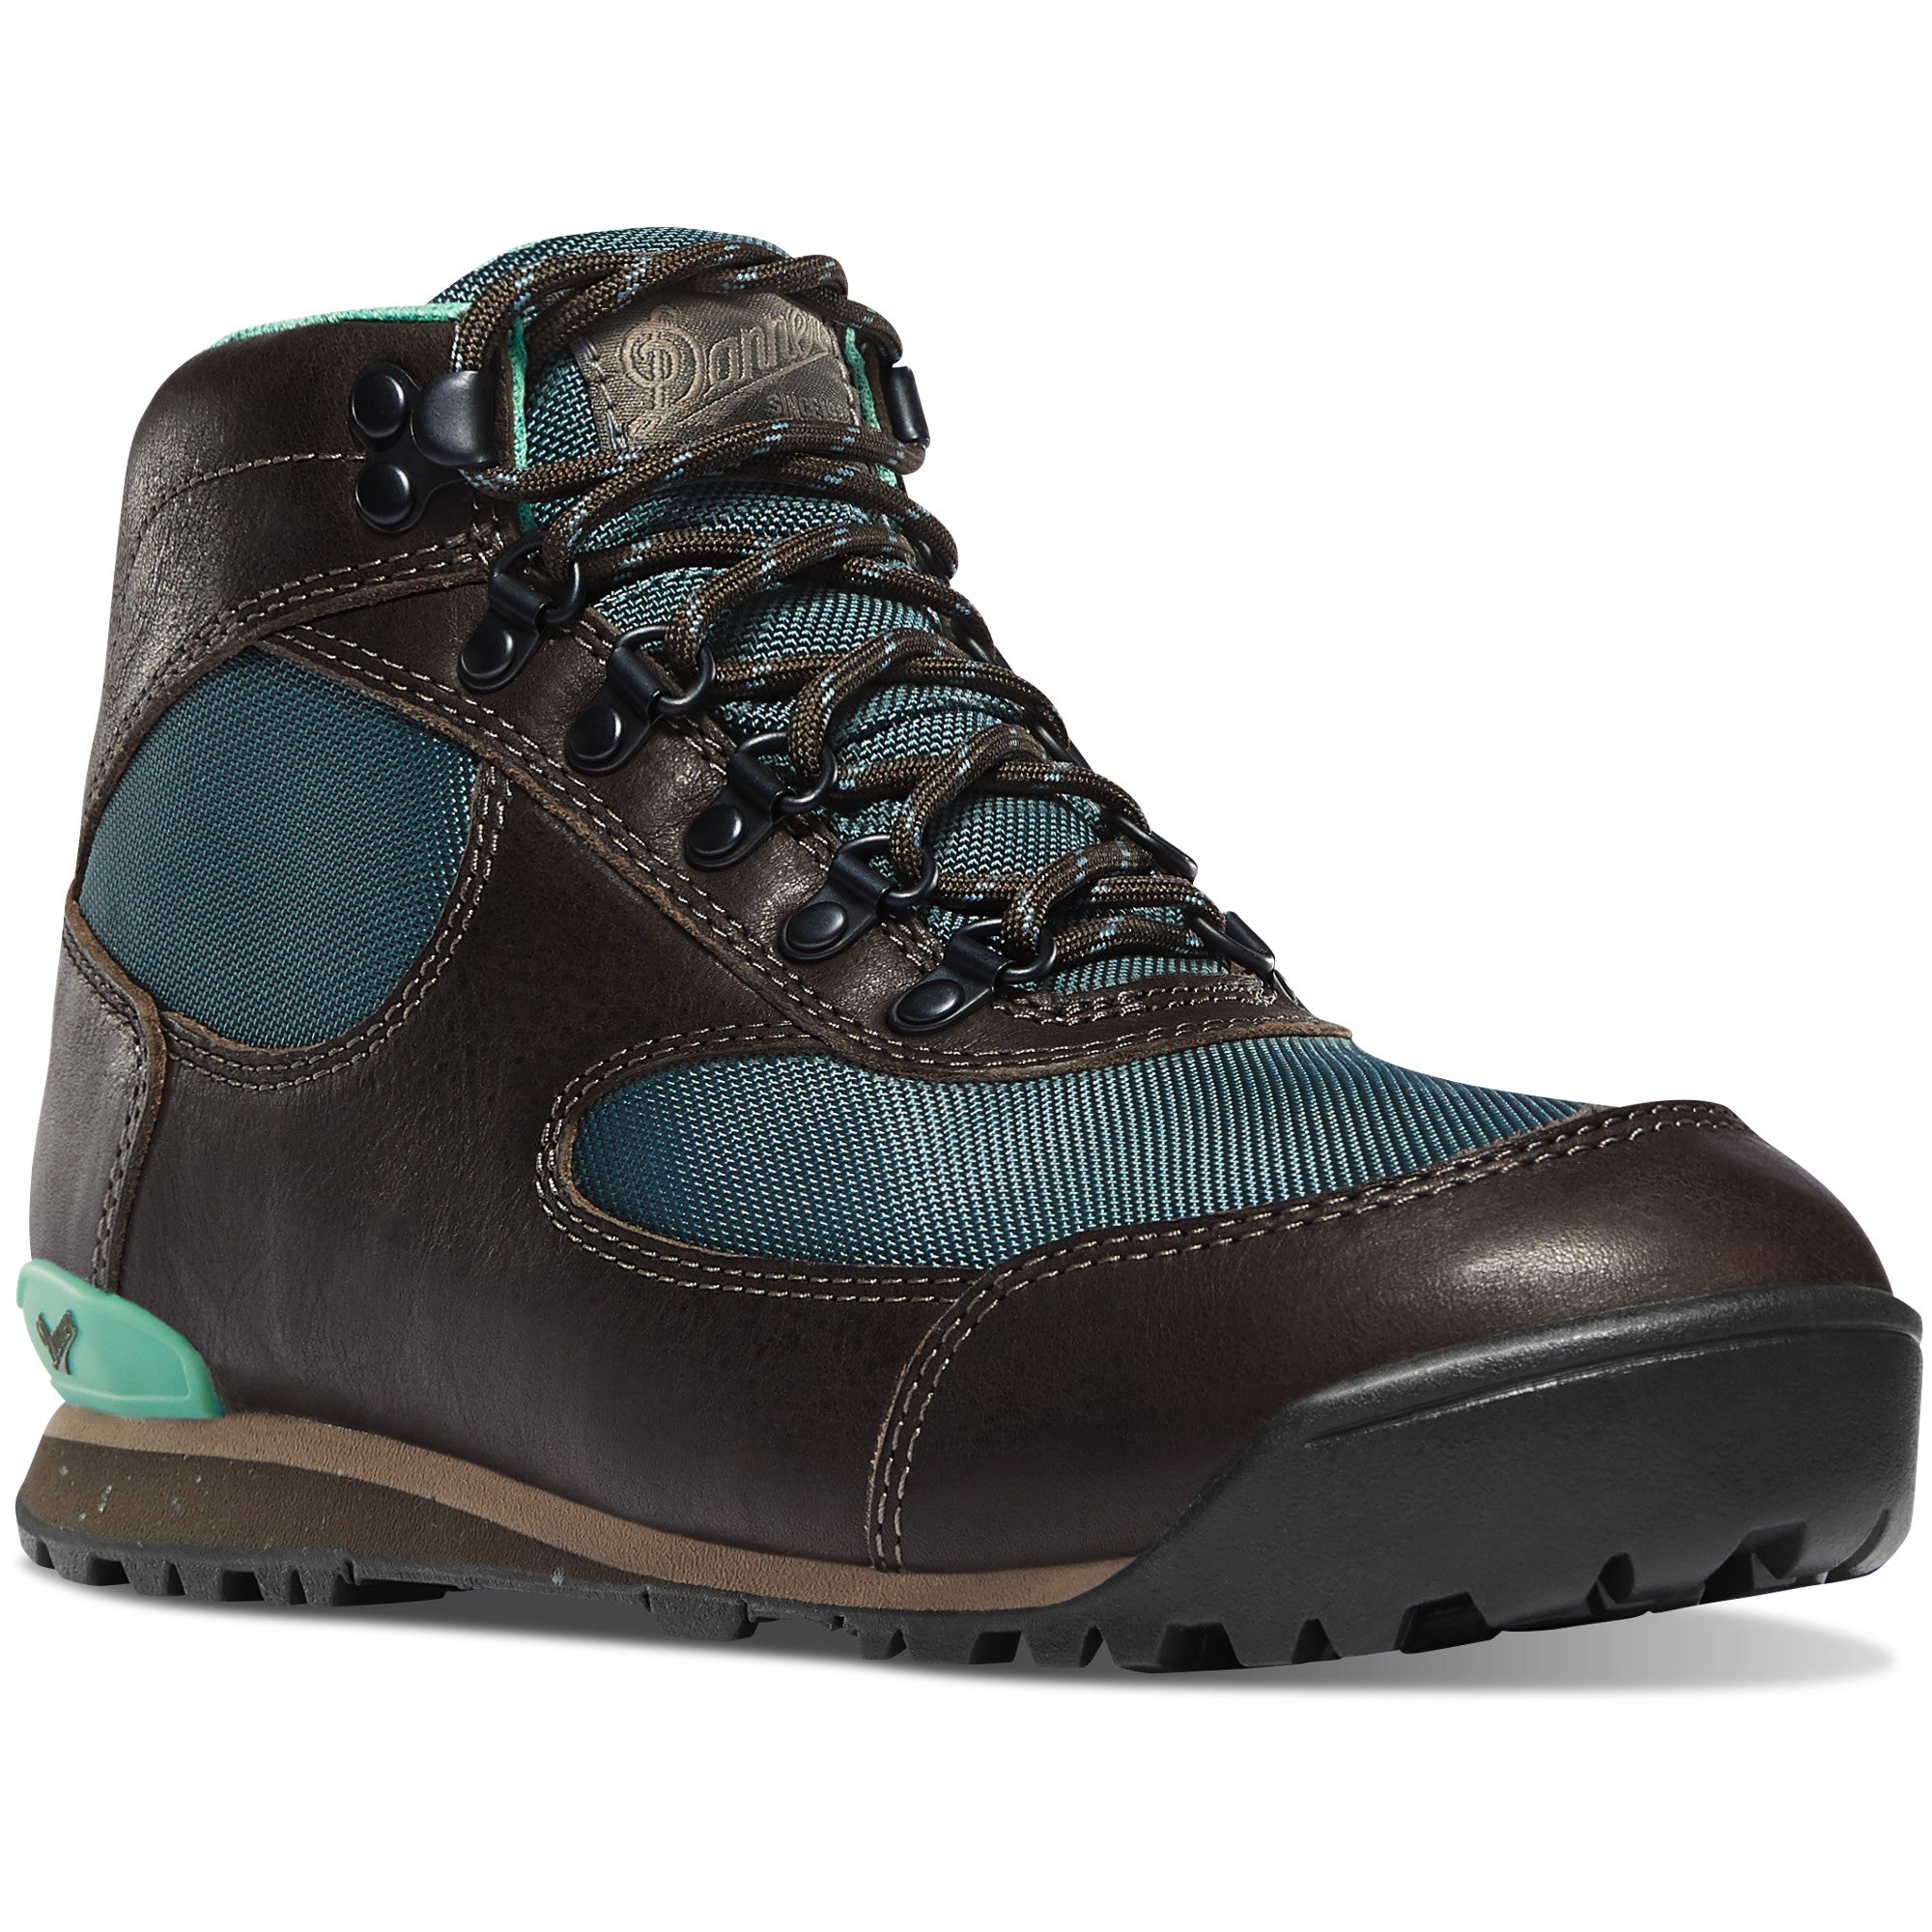 Danner Women's Jag 4.5" Waterproof Hiking Boot in Brindle/Goblin Blue from the side